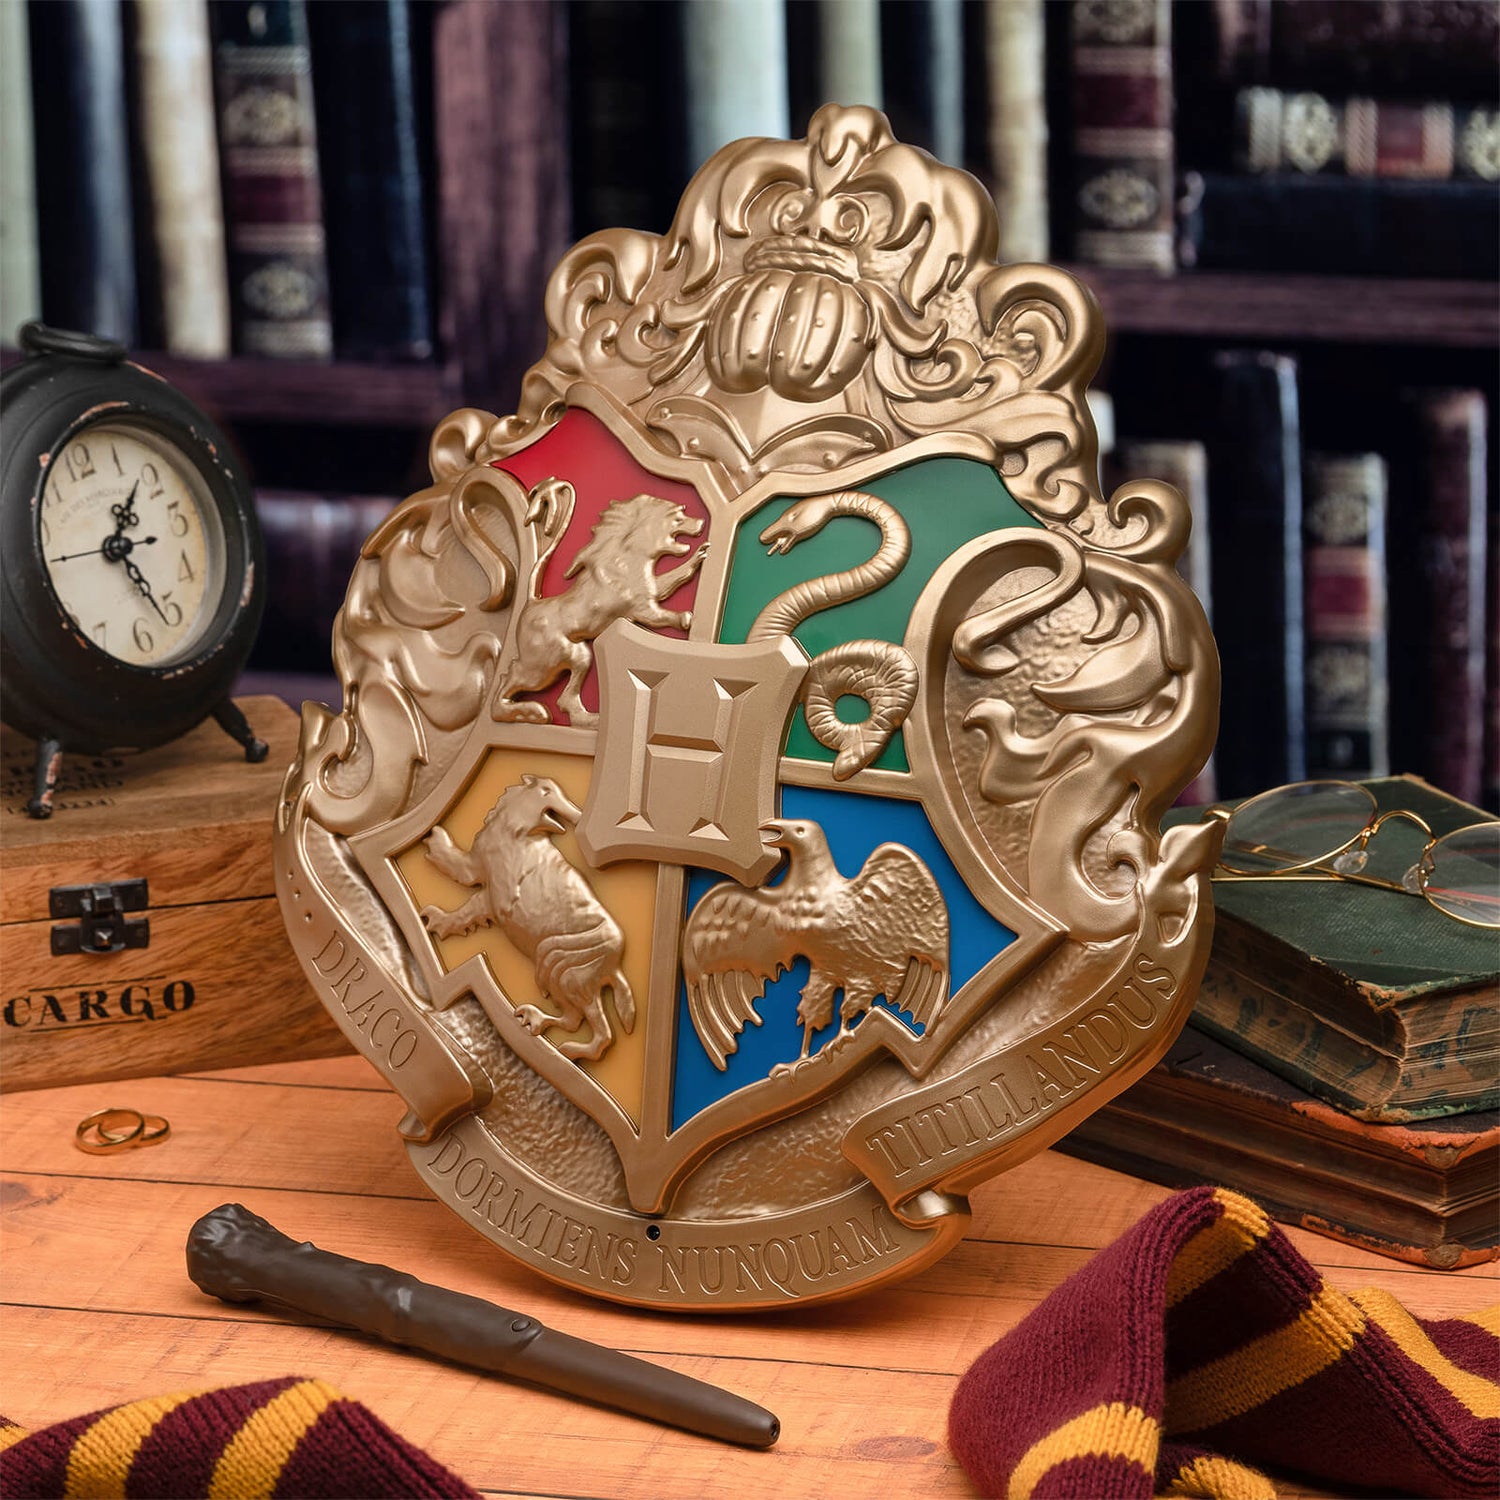 Harry Potter Hogwarts Crest Light with Wand Control